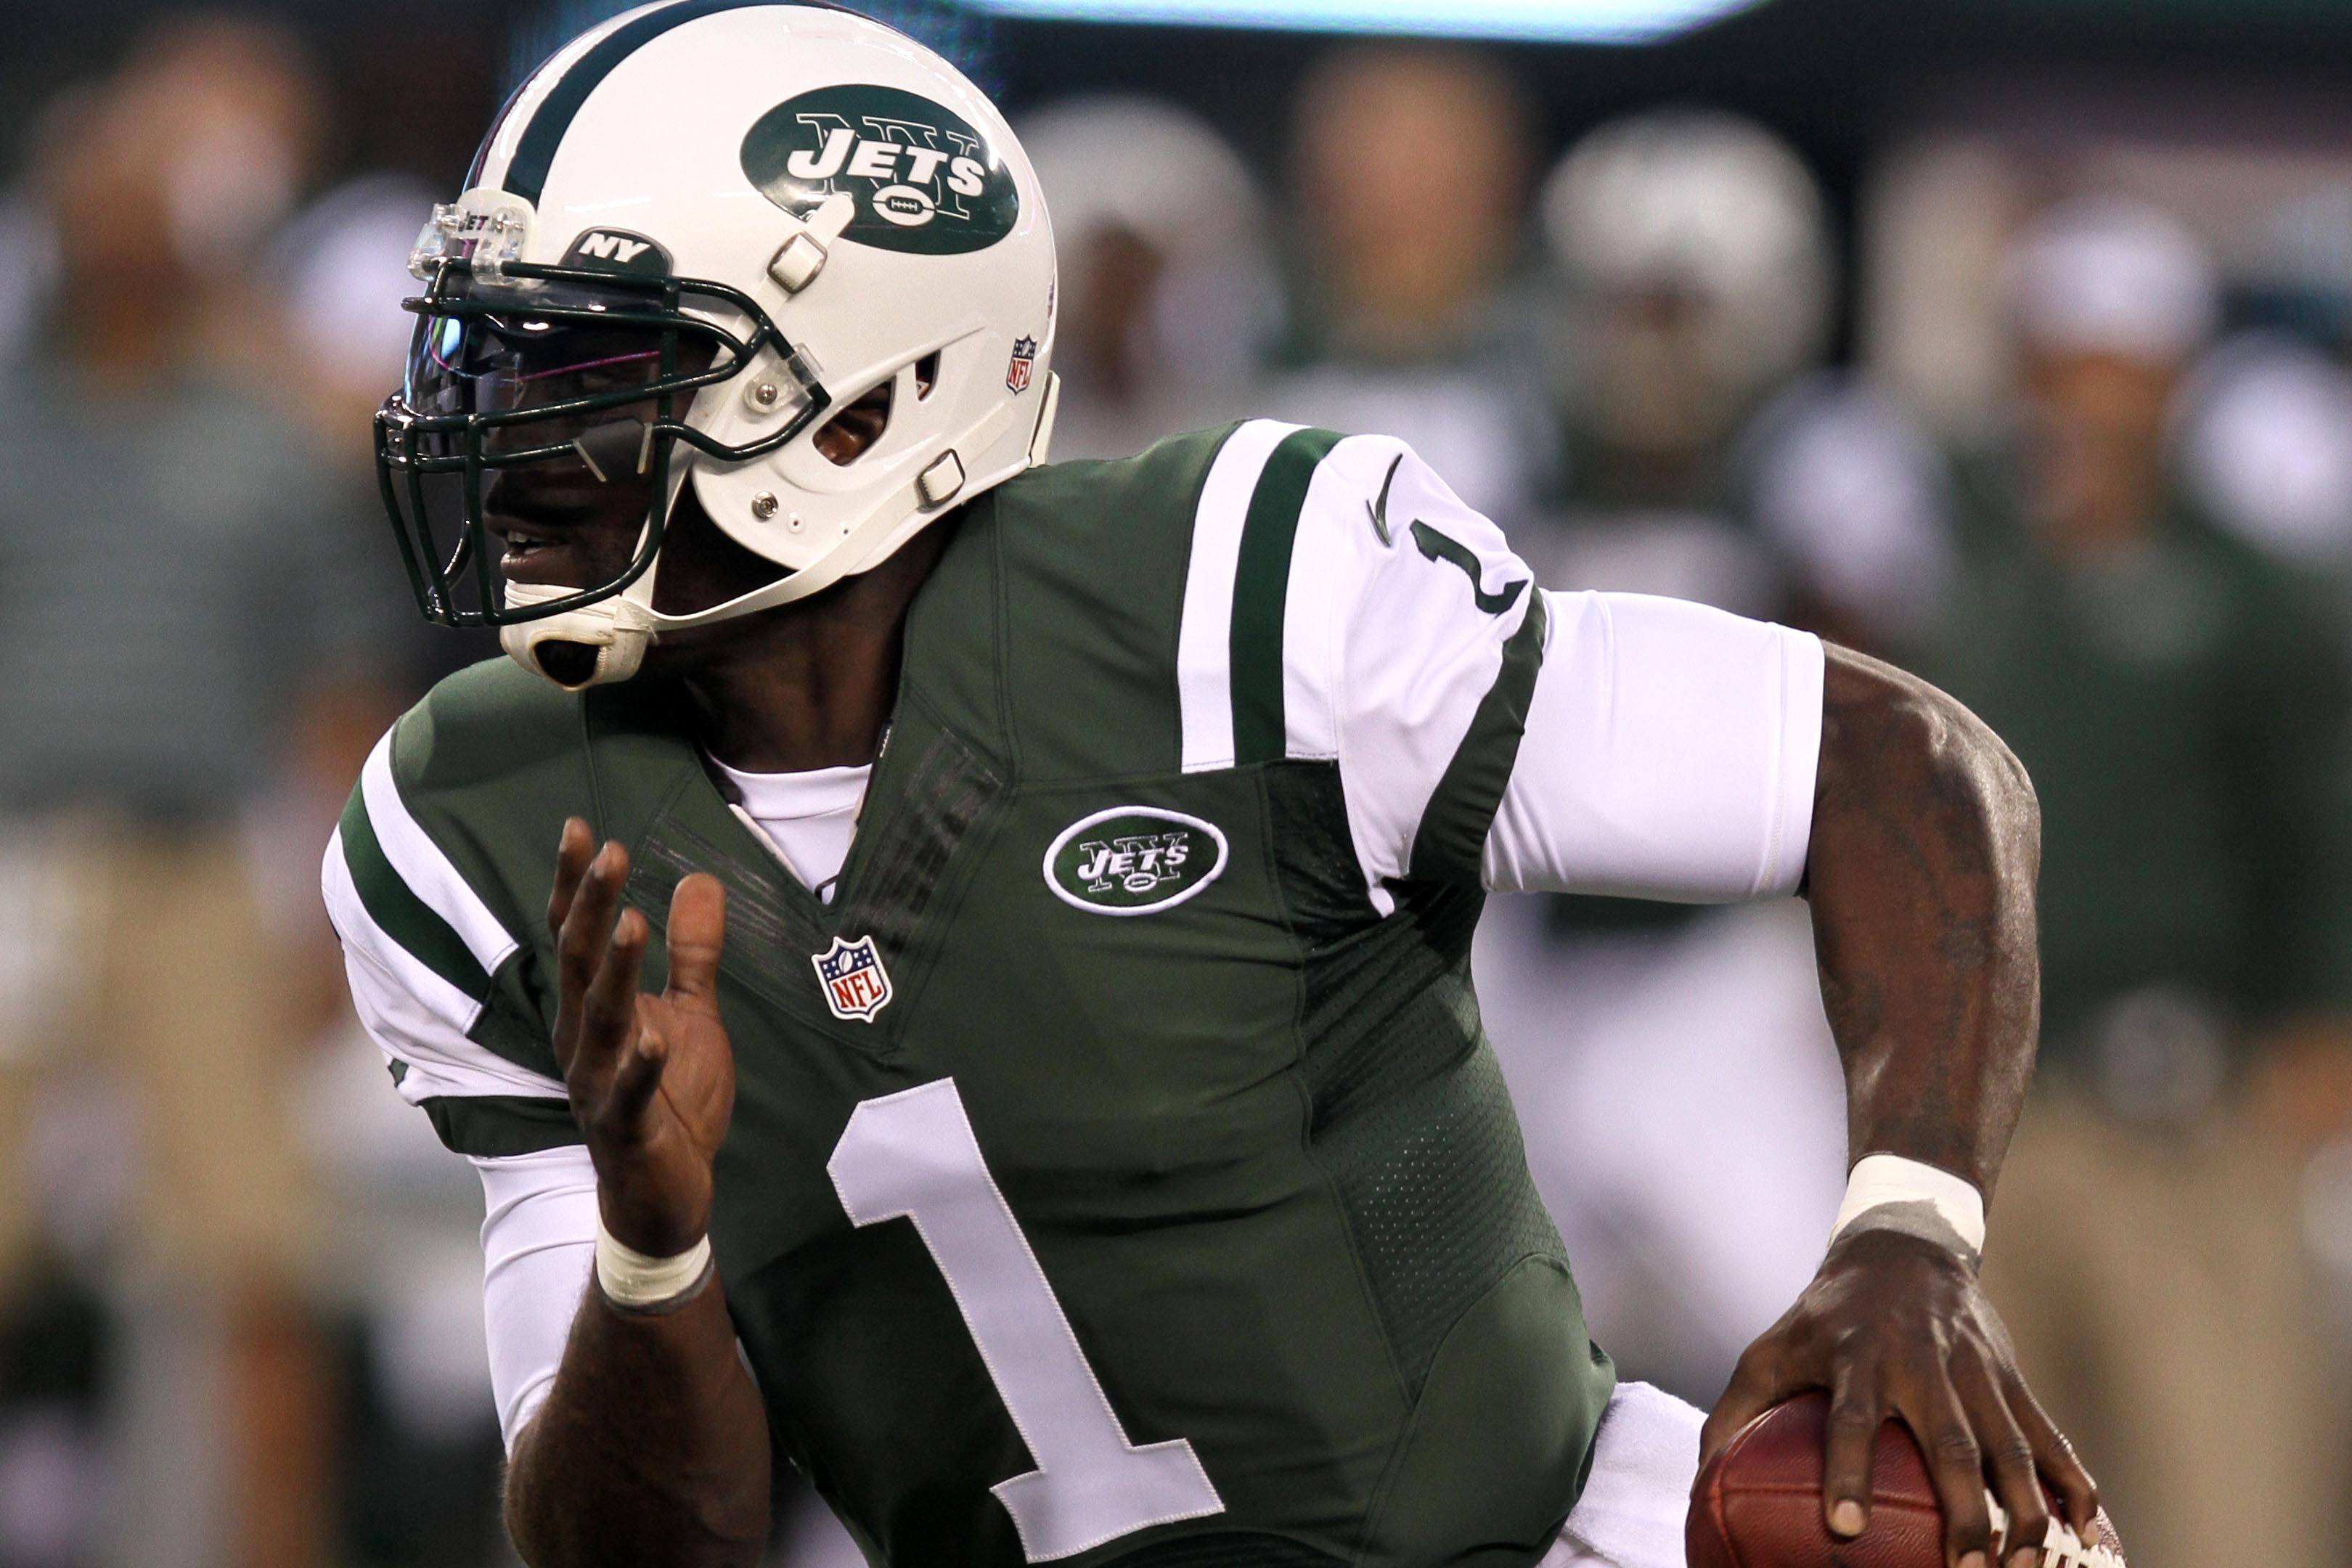 Michael Vick Tweets Reminder to NFL Teams That He’s Ready